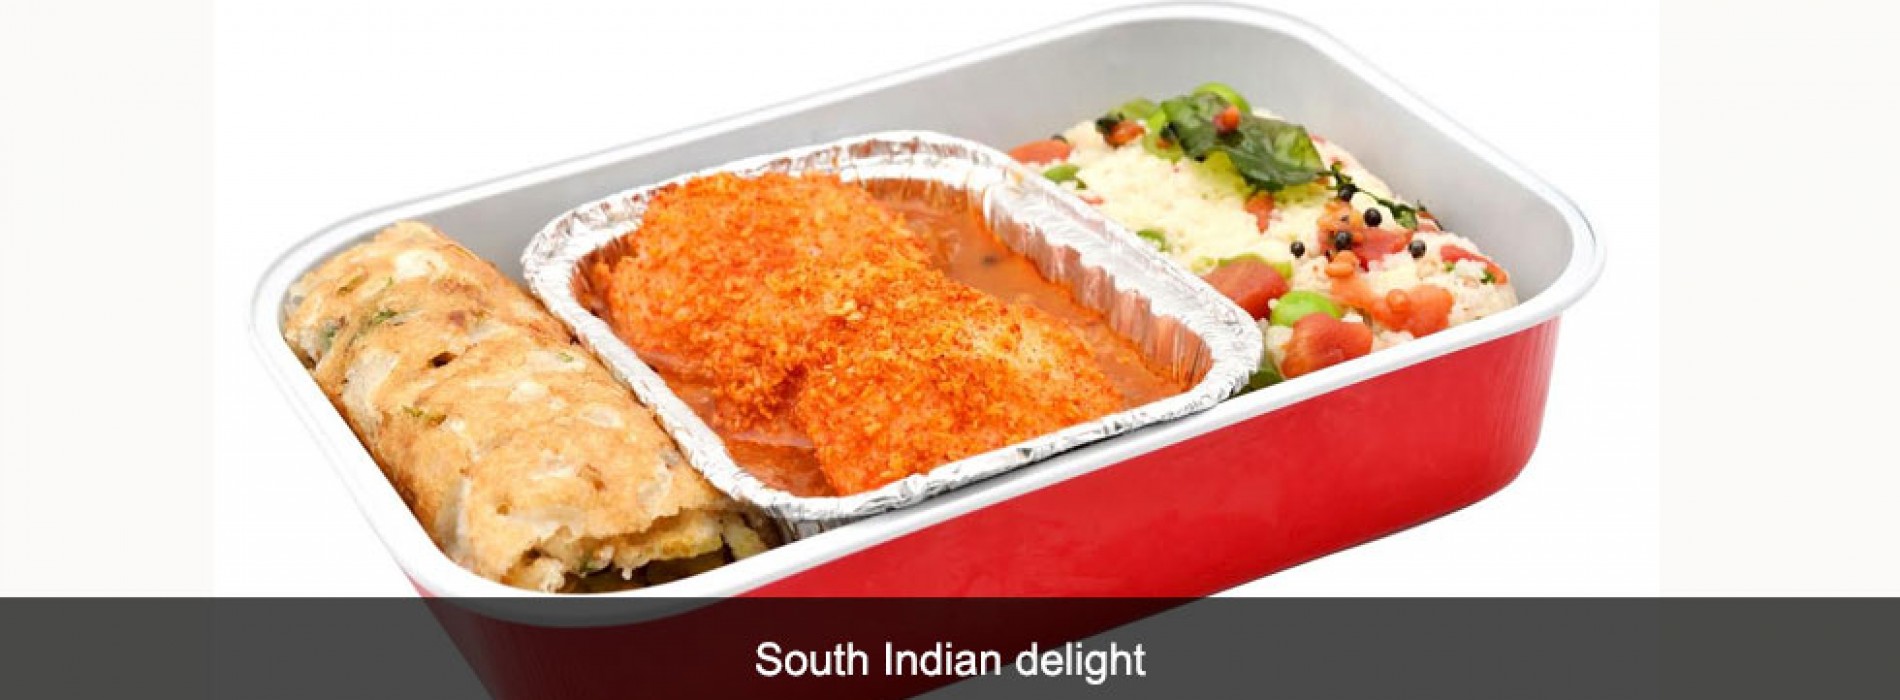 AirAsia India introduces an array of hot meals & snacks for summer